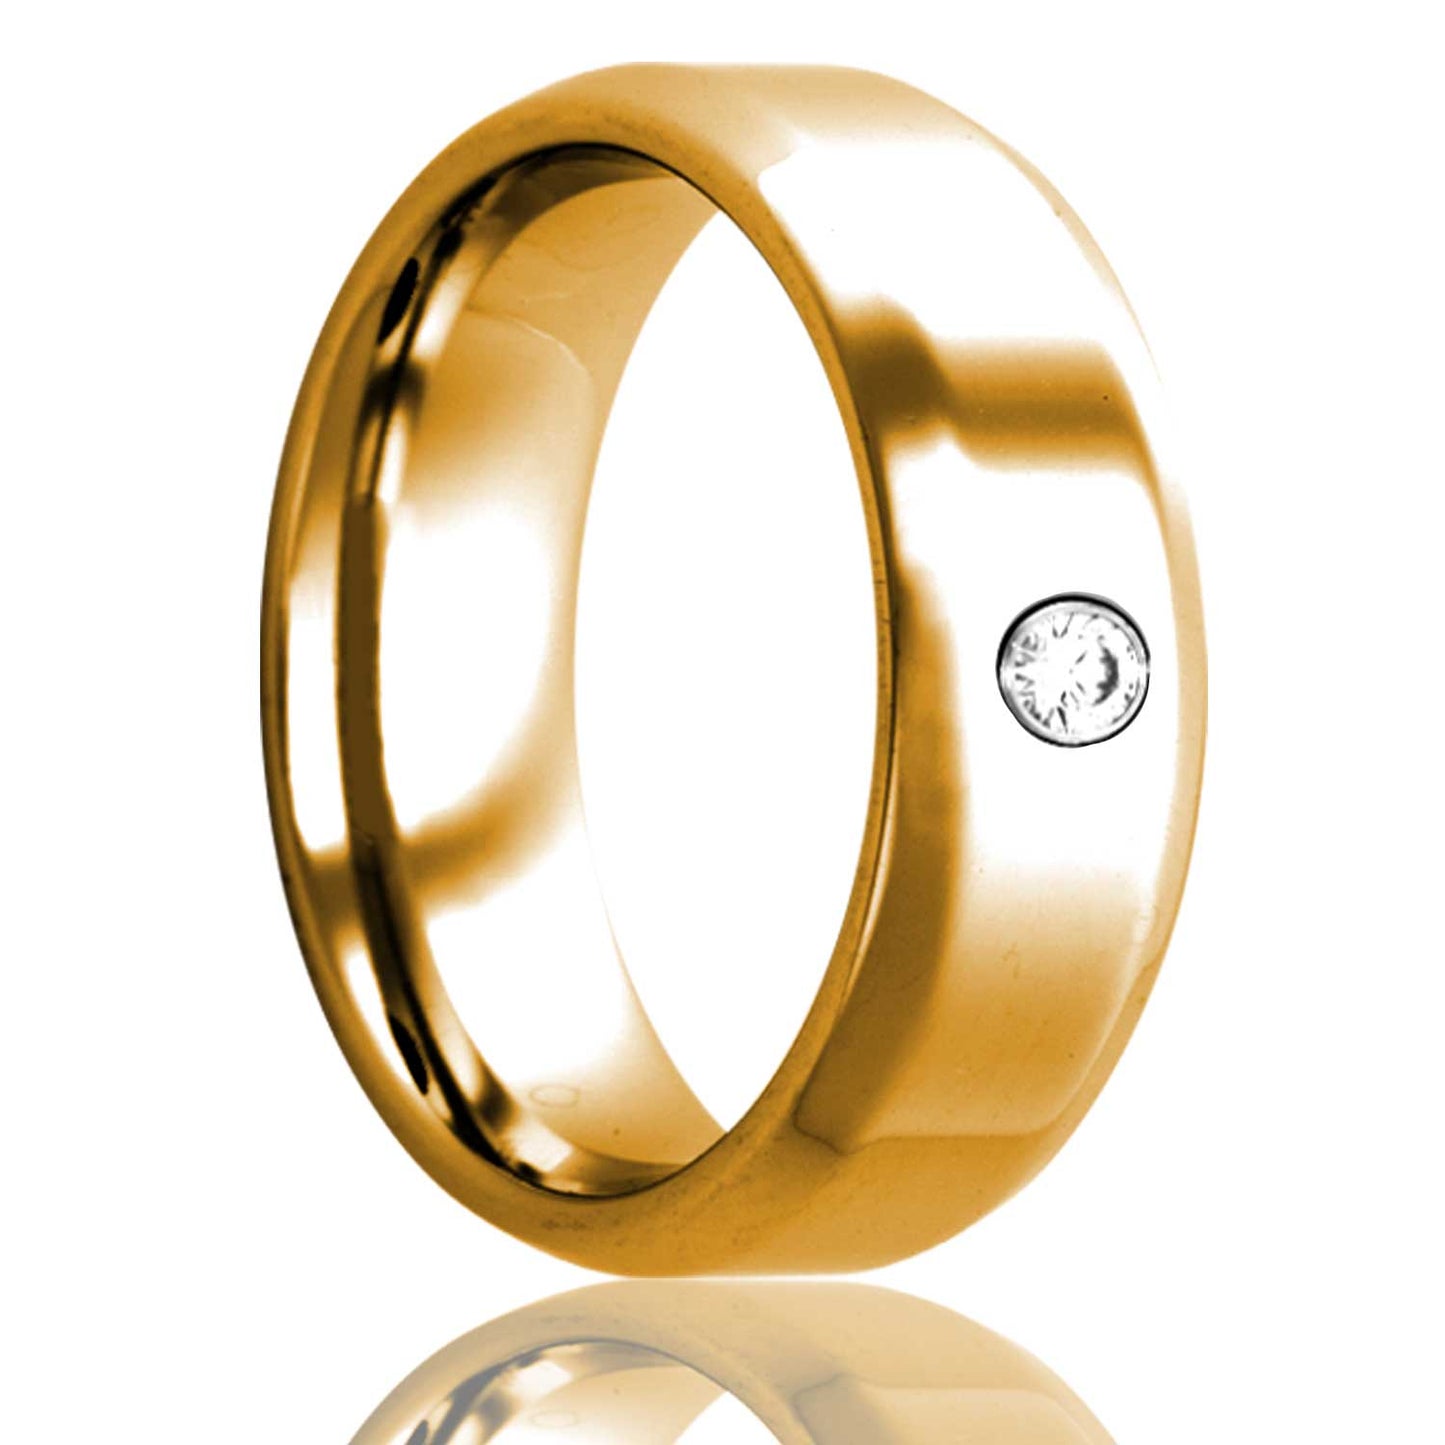 A 14k gold wedding band with diamond & beveled edges displayed on a neutral white background.